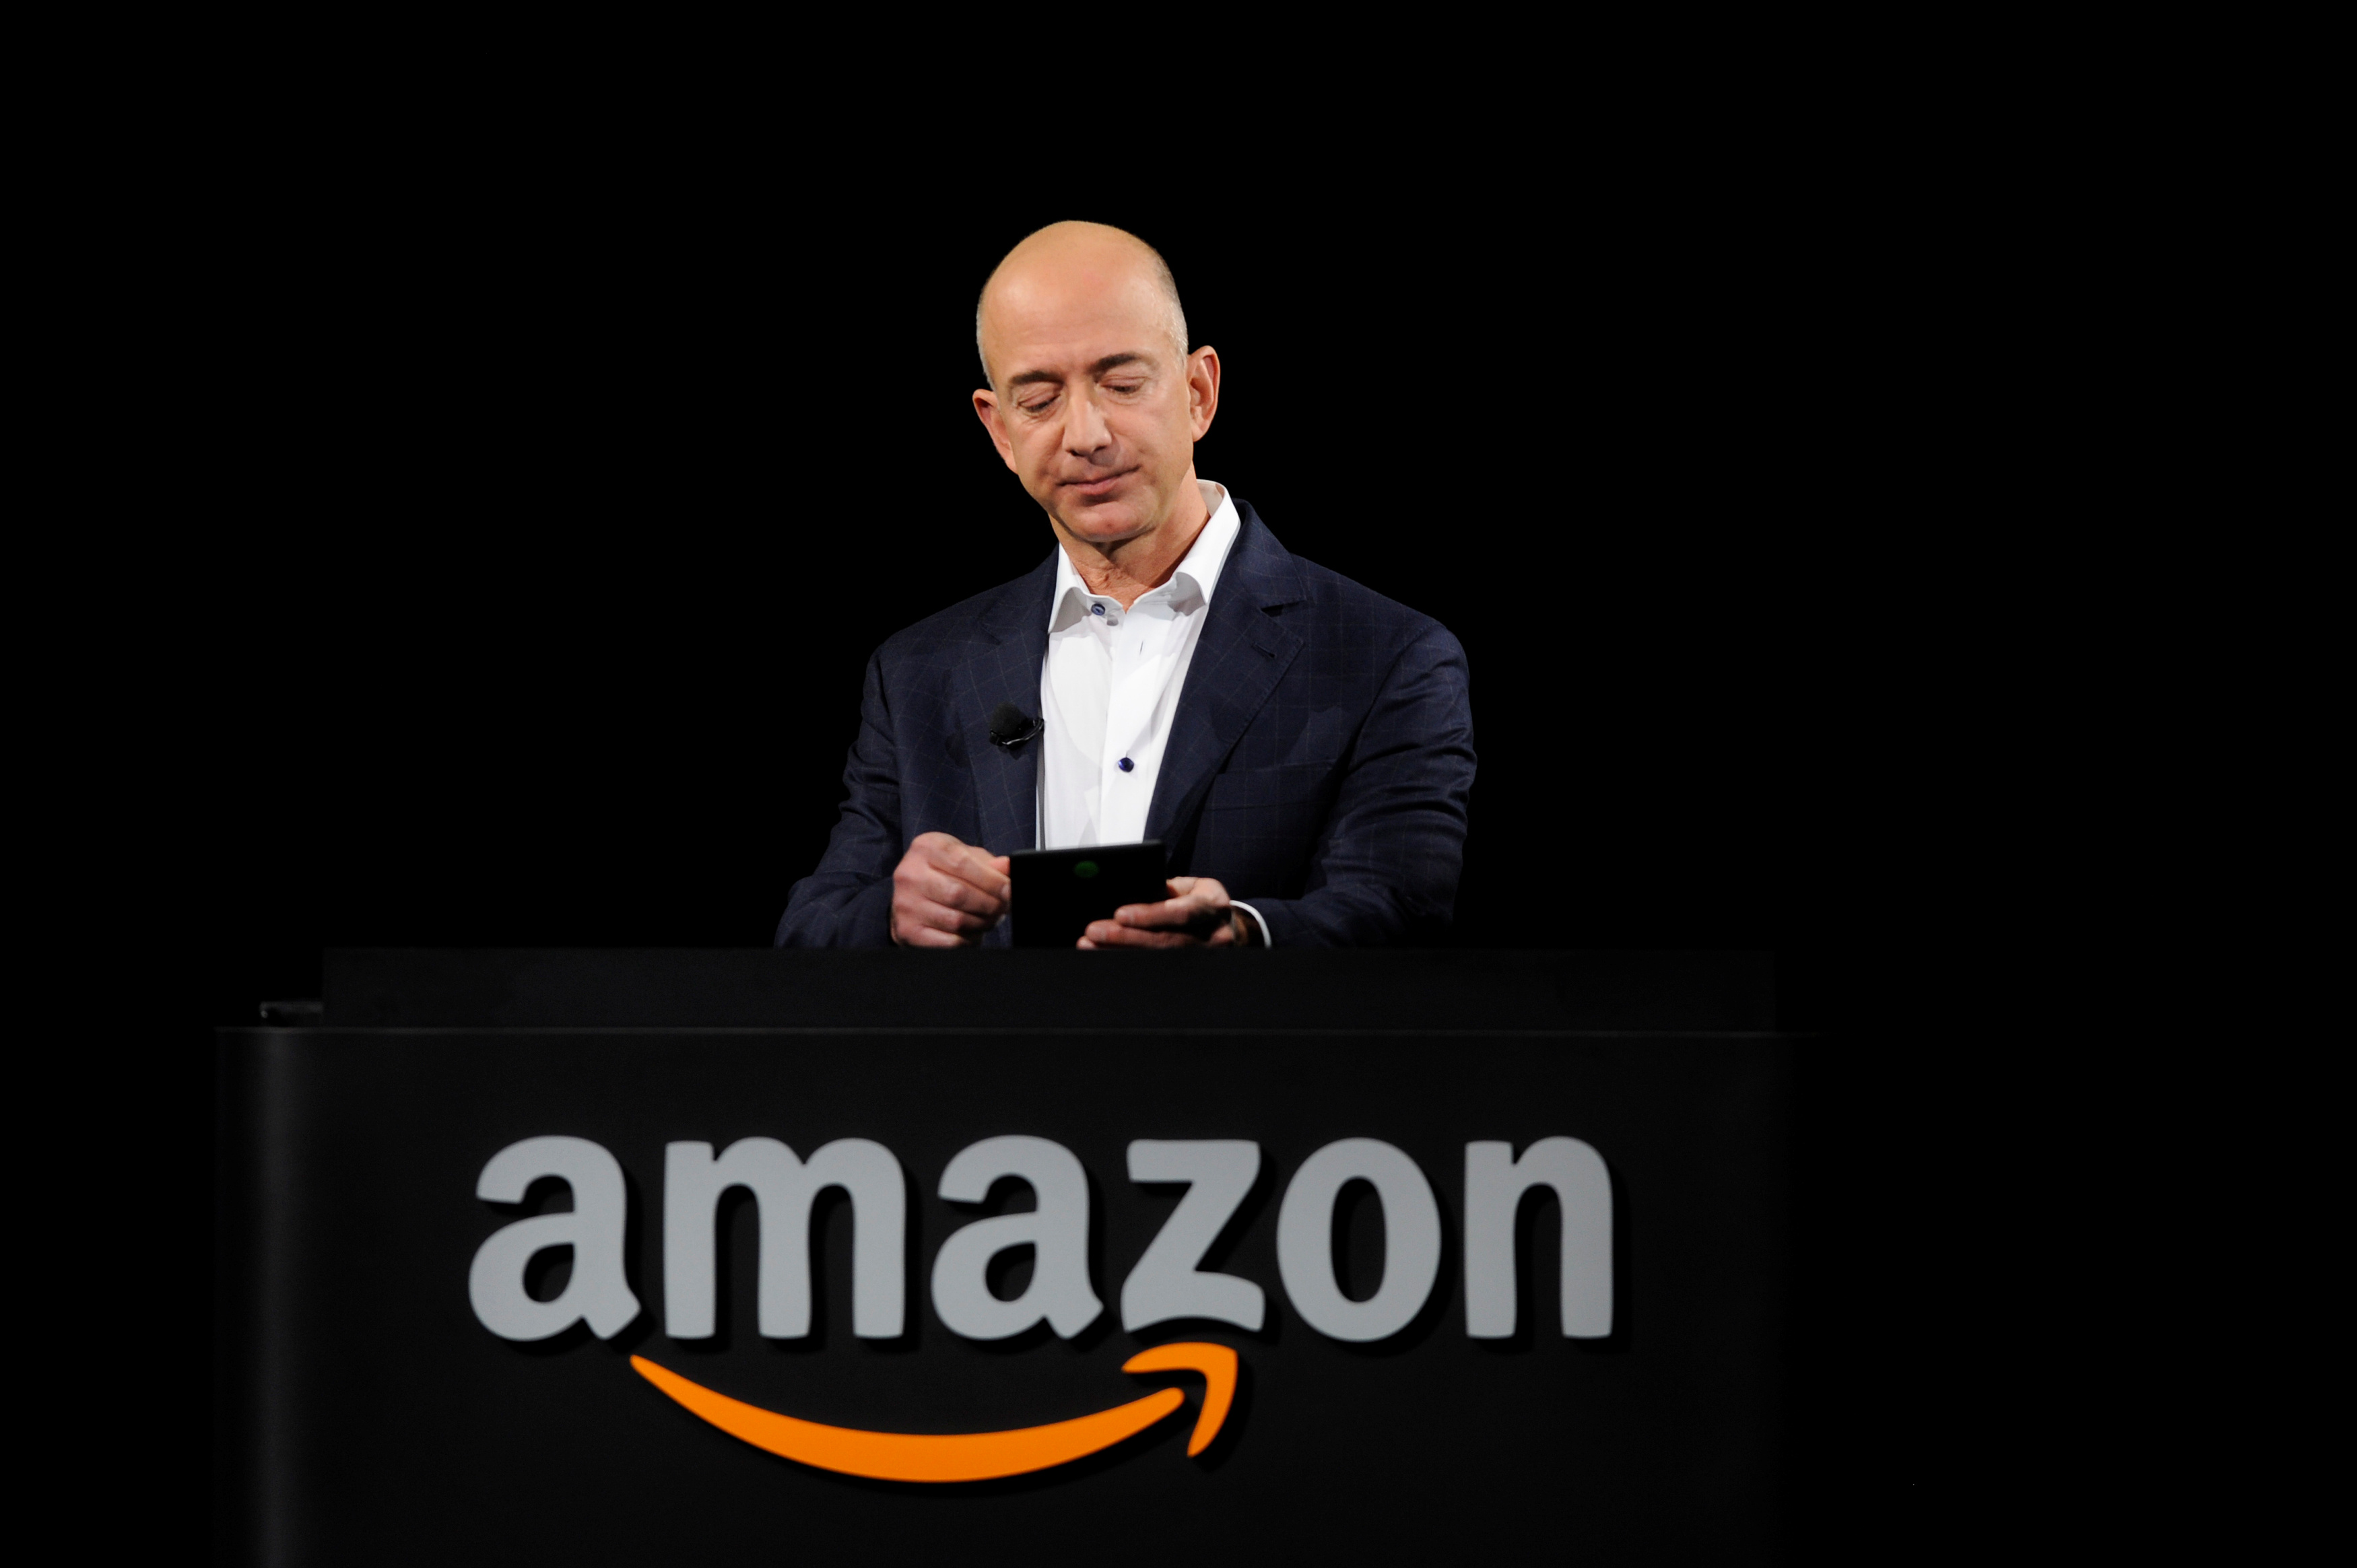 File photo of the founder of Amazon, Jeff Bezos (REUTERS / Gus Ruelas)